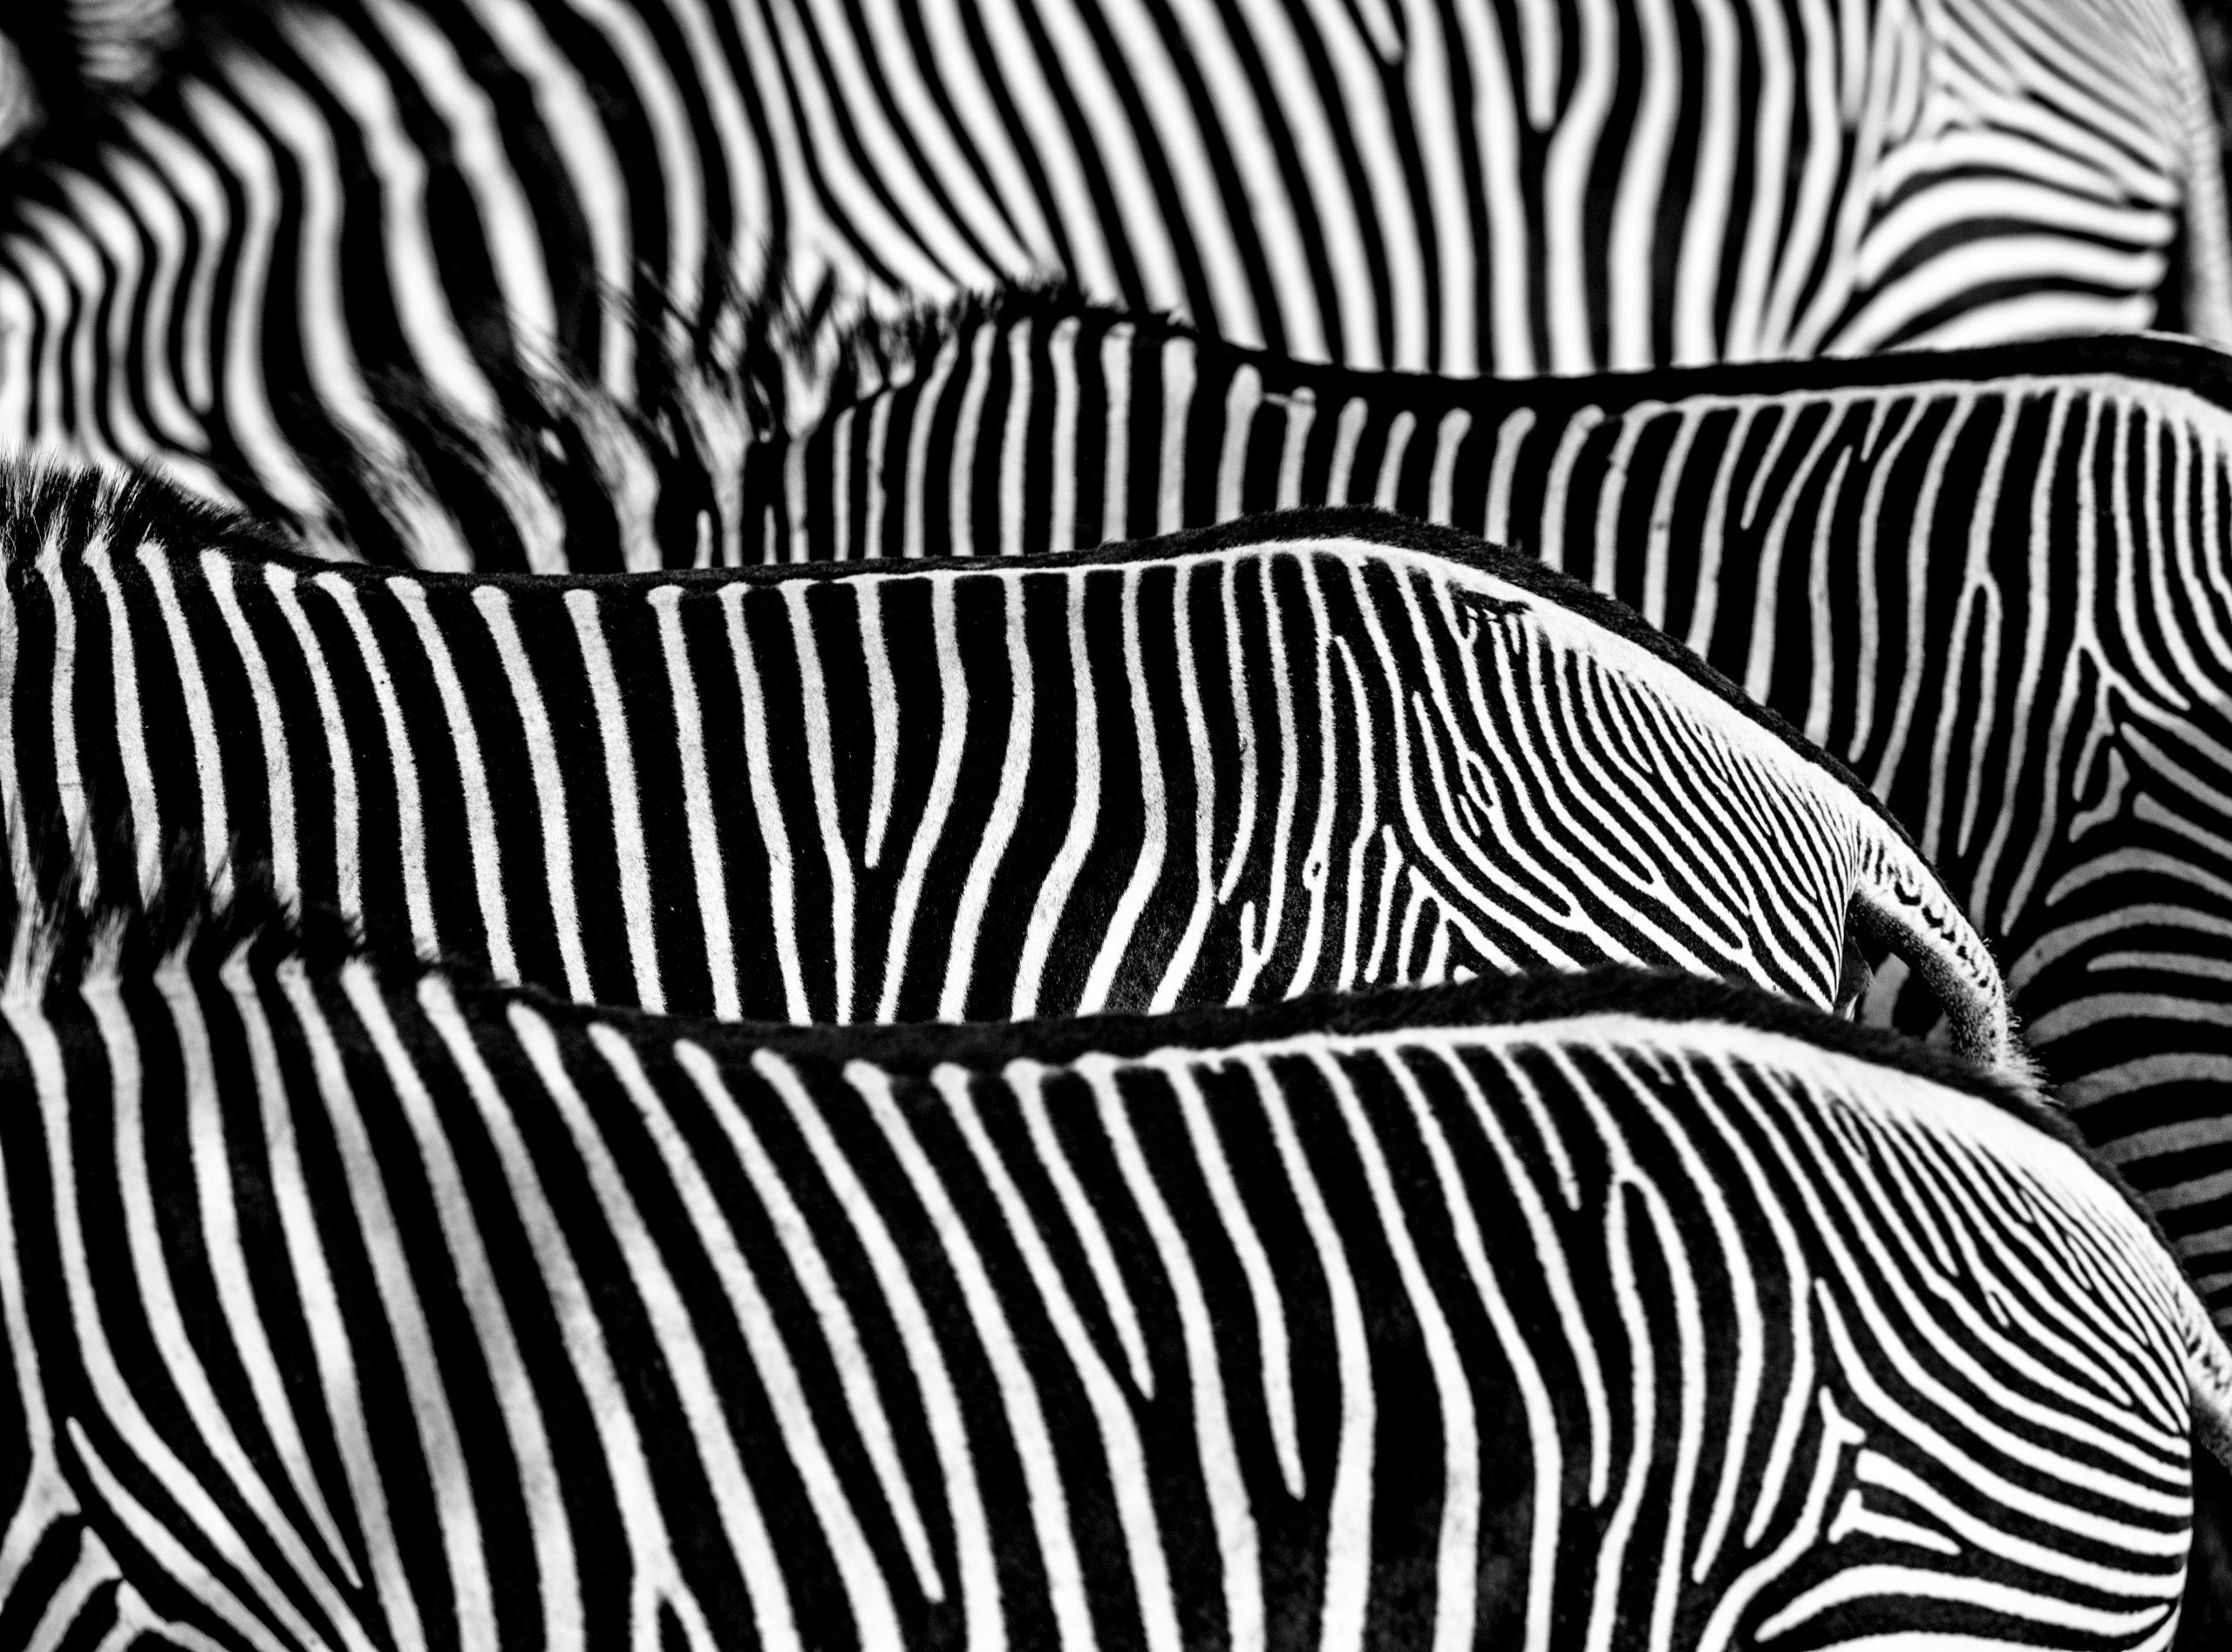 David Yarrow Black and White Photograph - The Factory - fine art photography wildlife of zebras, abstract line pattern